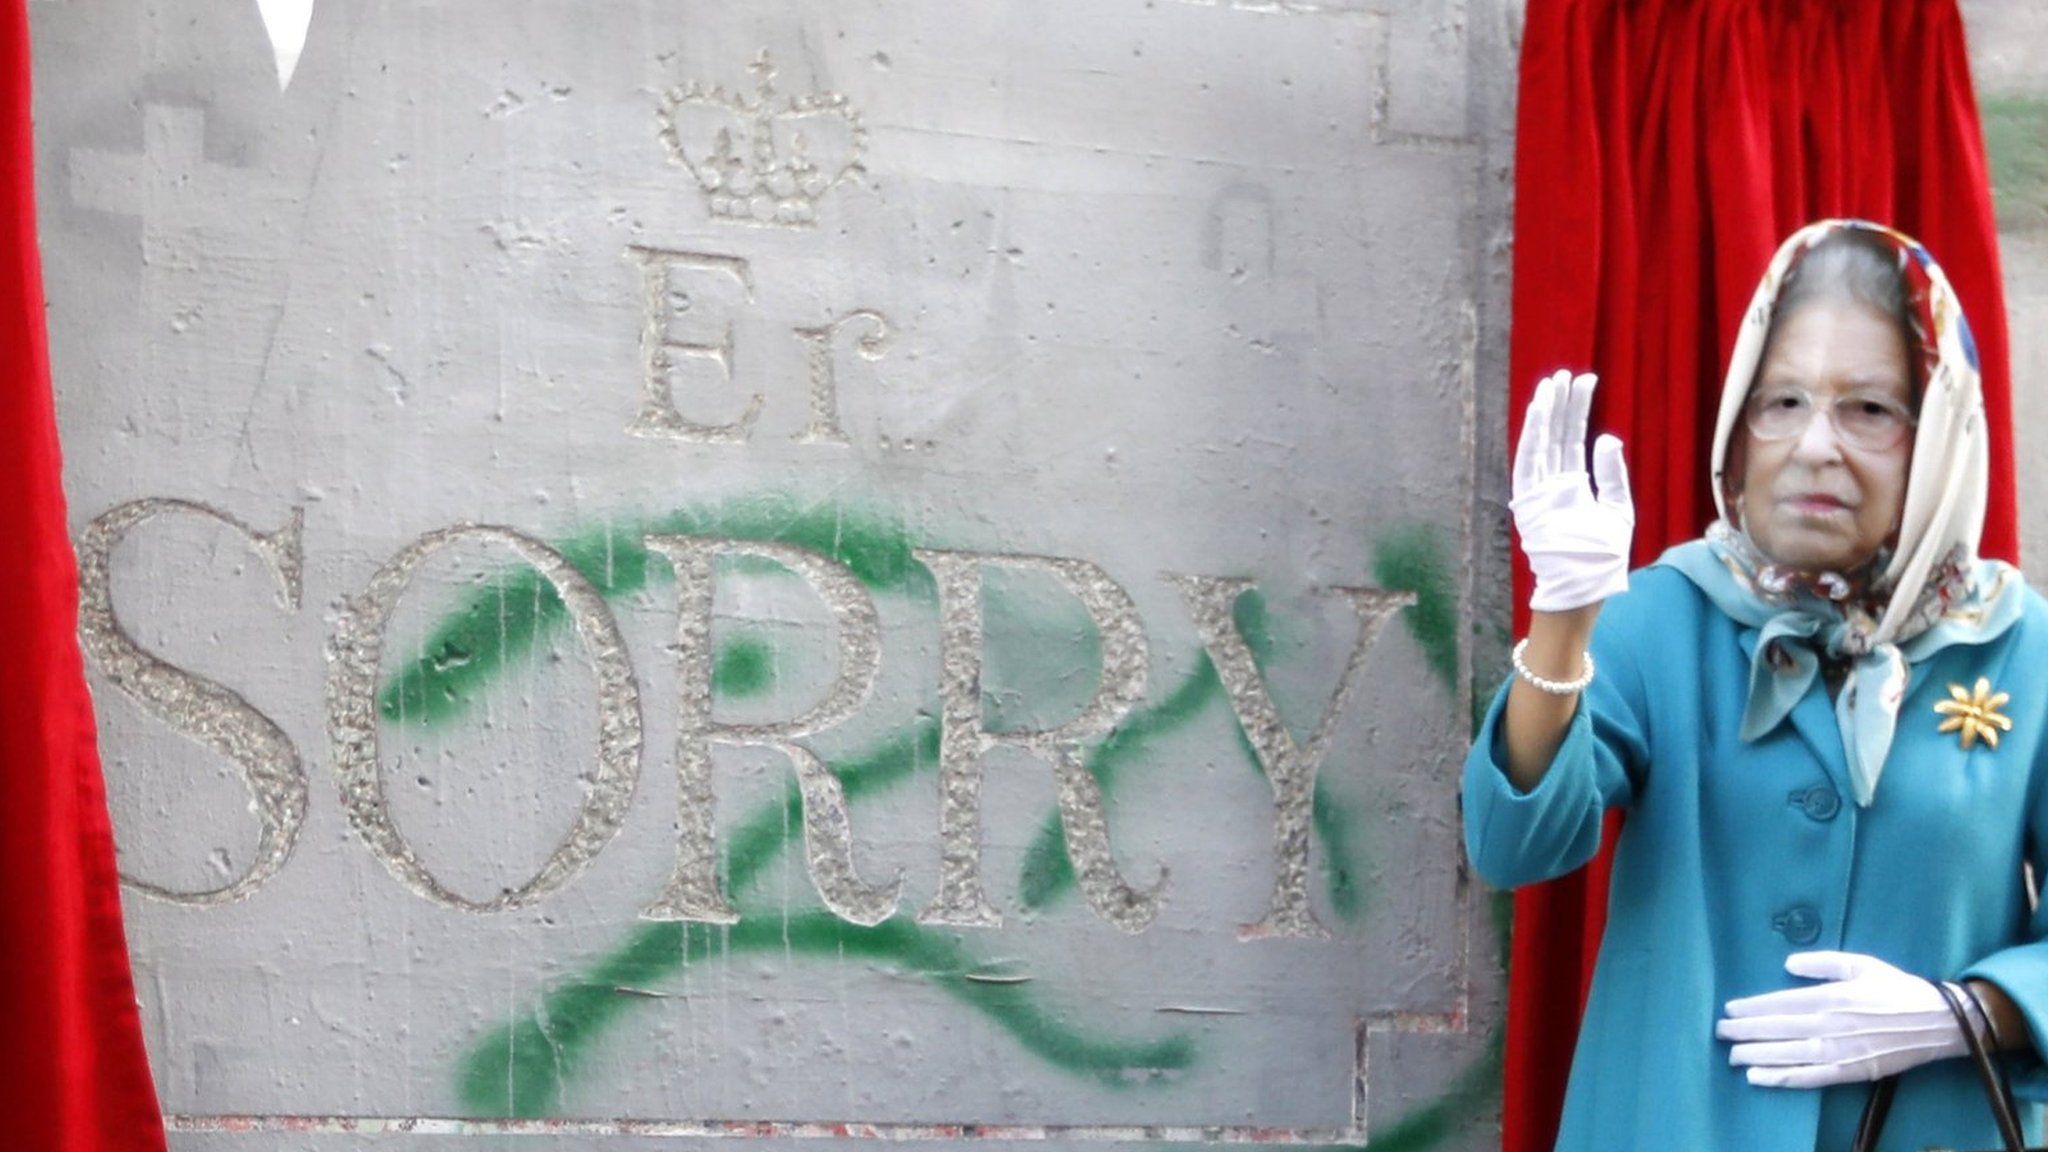 An actor dressed as Queen Elizabeth II unveils a mock apology for the Balfour Declaration etched into Israel's West Bank barrier that says: "Er... Sorry."